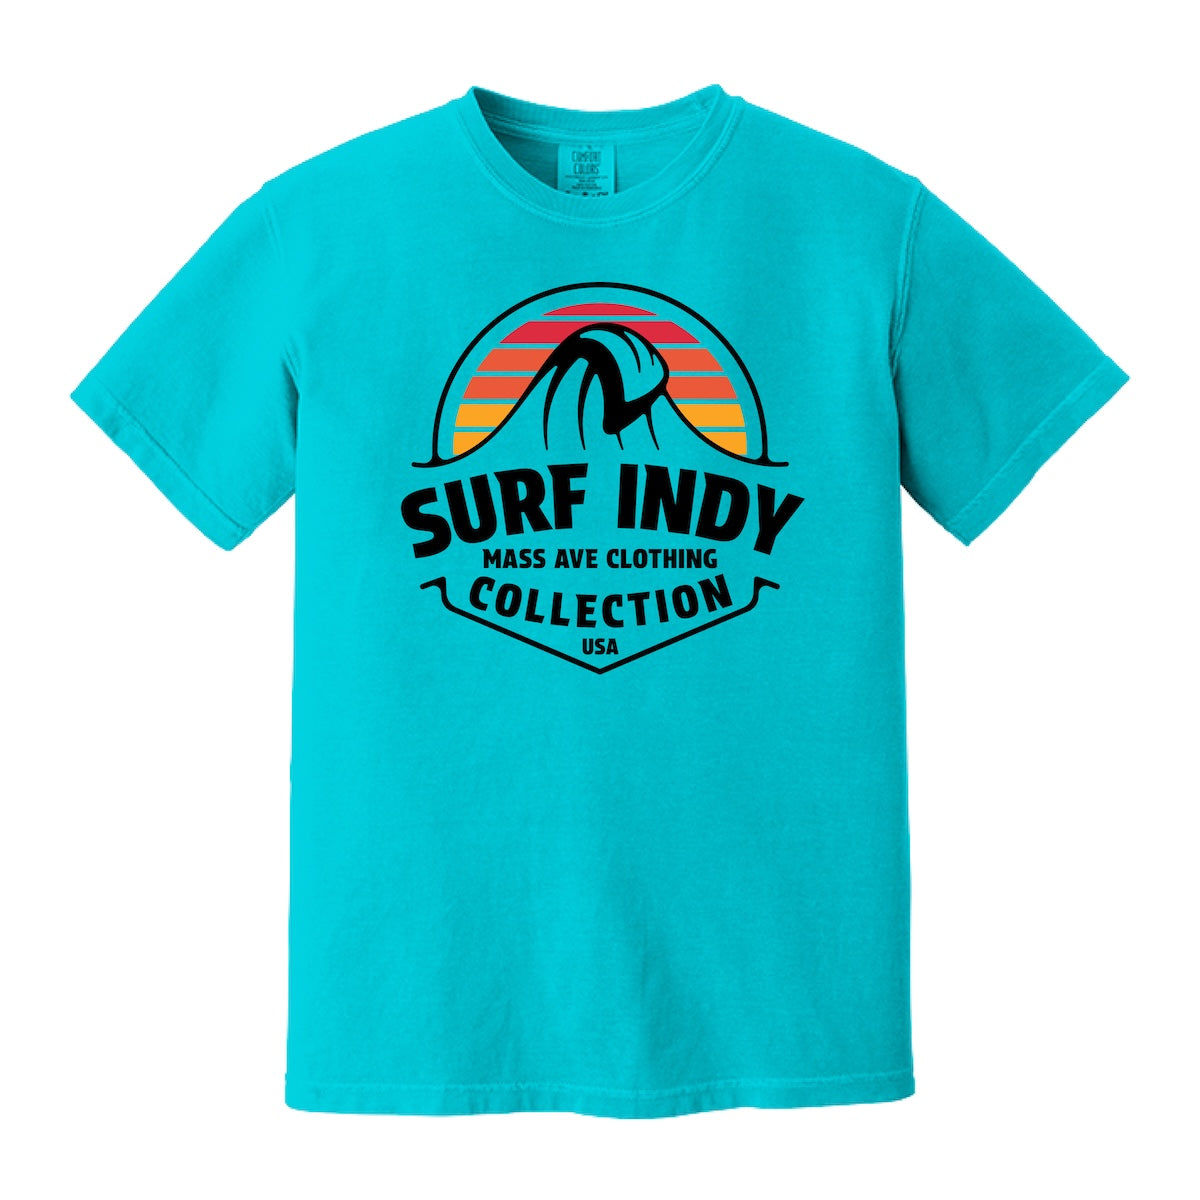 Surf Indy Collection Unisex Garment-Dyed Cotton T-shirt